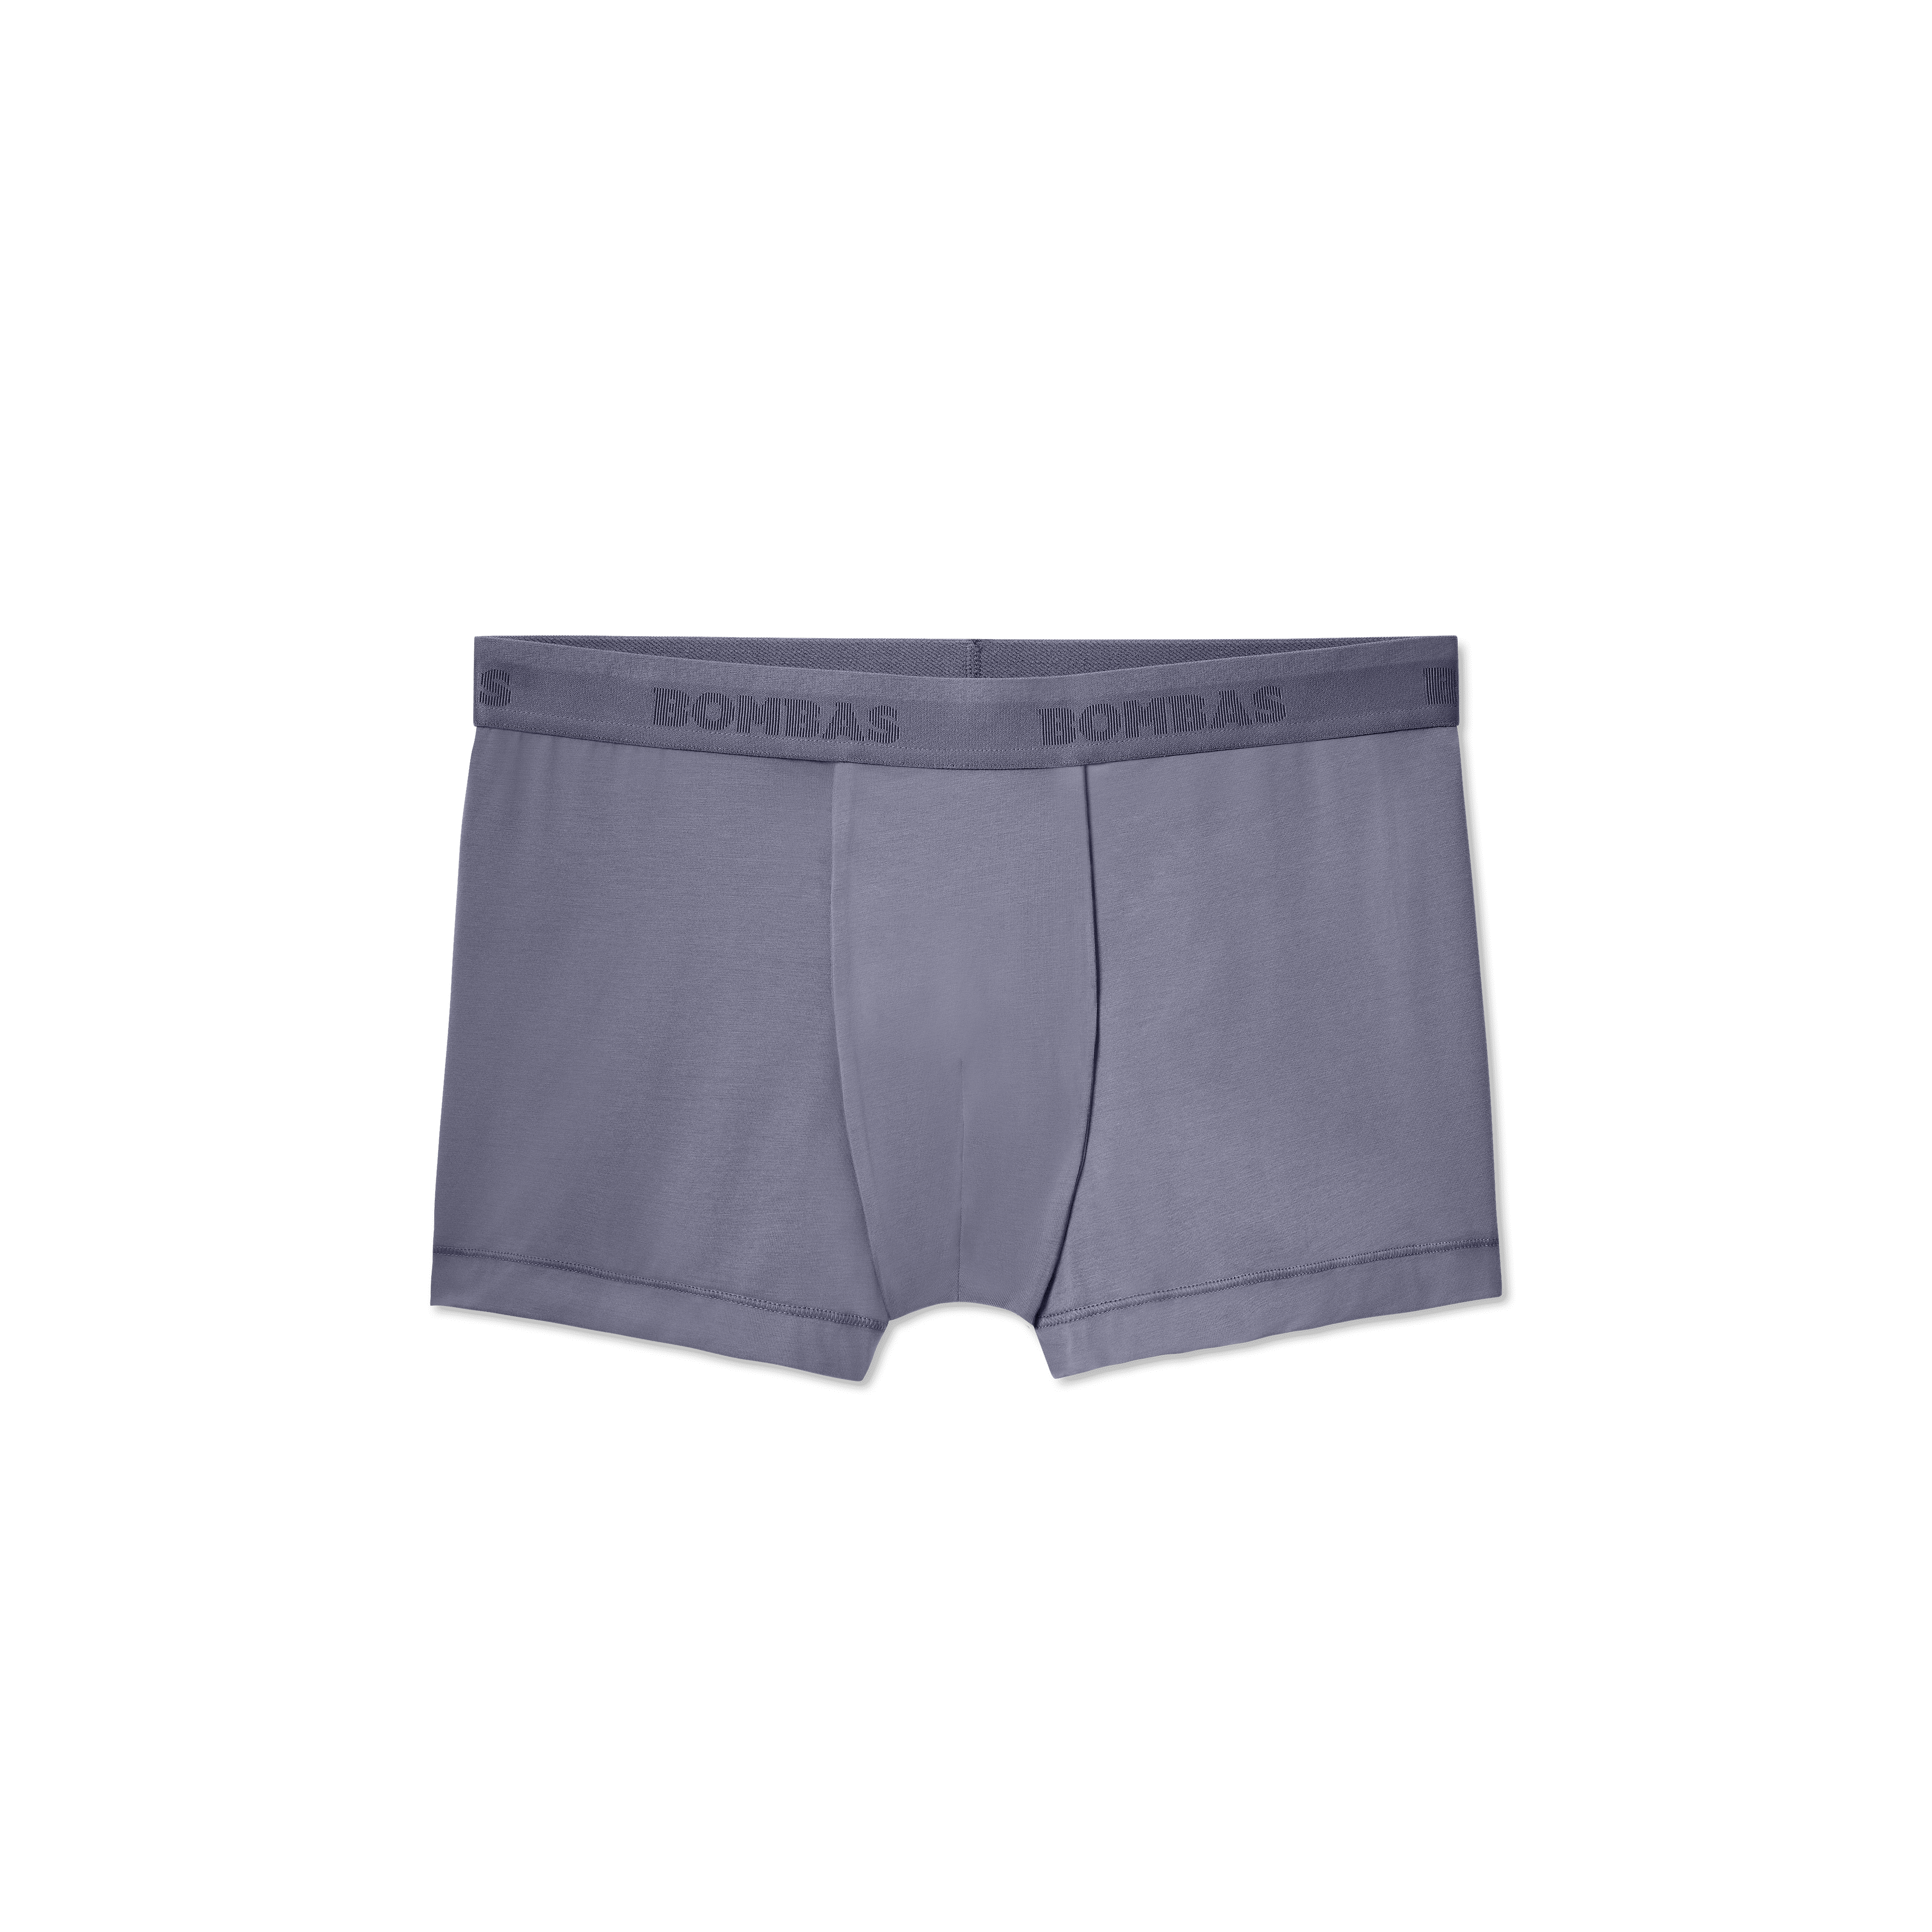 Metrojaya - Bundies is the Most Comfortable men's underwear you'll ever  own! Made from Super Soft Lenzing Modal and Premium Organic Cotton for  ultimate comfort and breathability. Grab yours now while promo